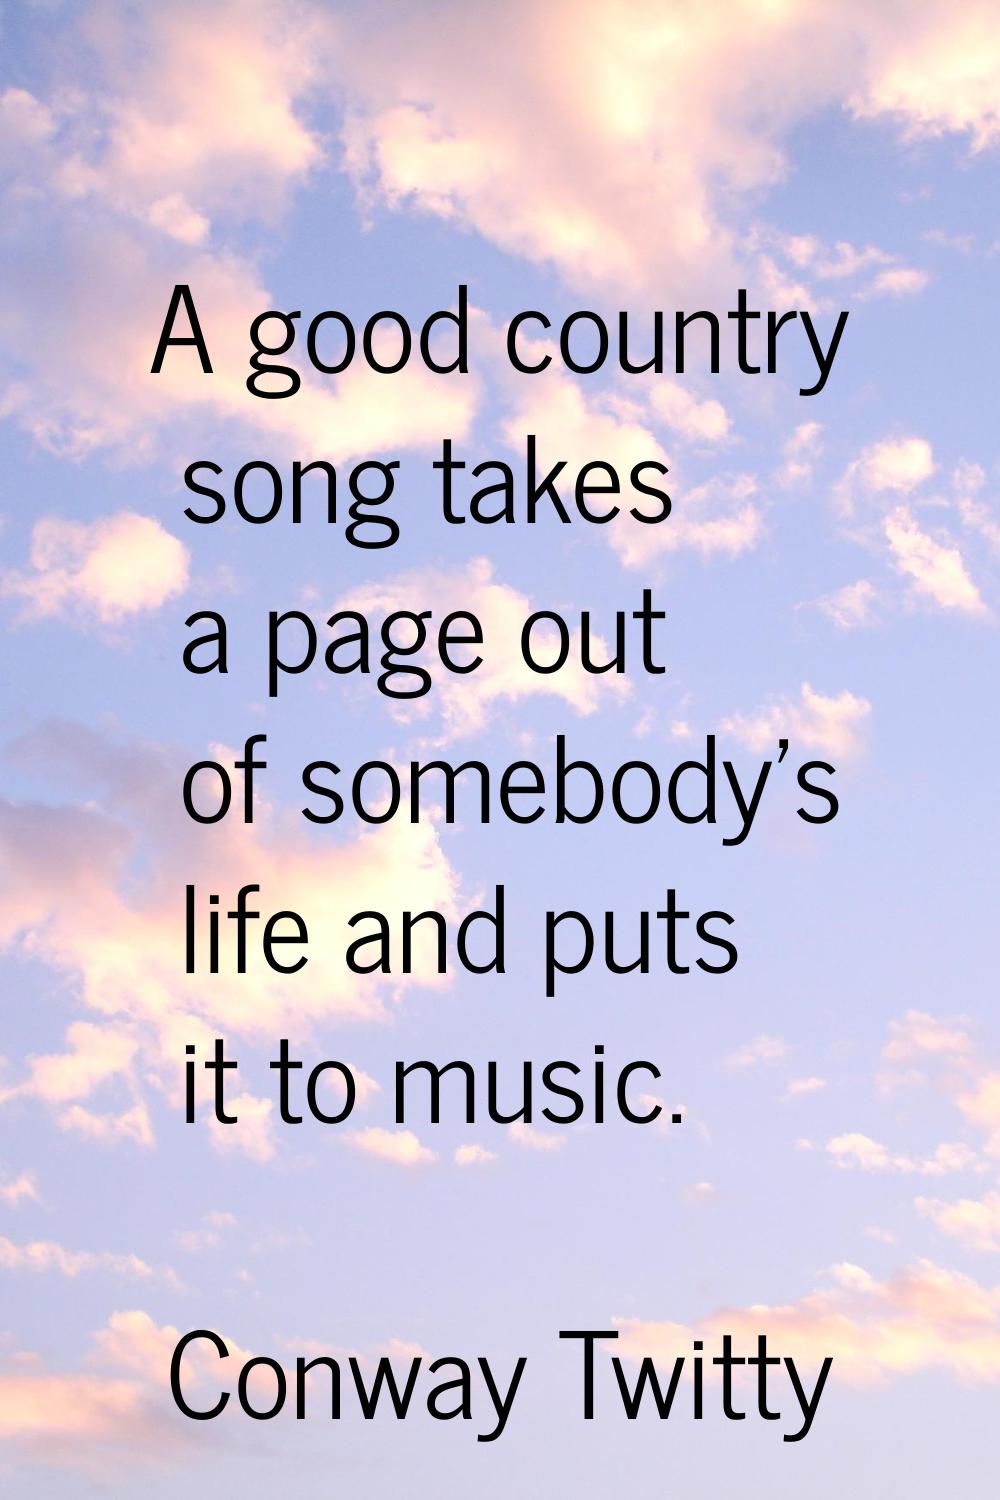 A good country song takes a page out of somebody's life and puts it to music.